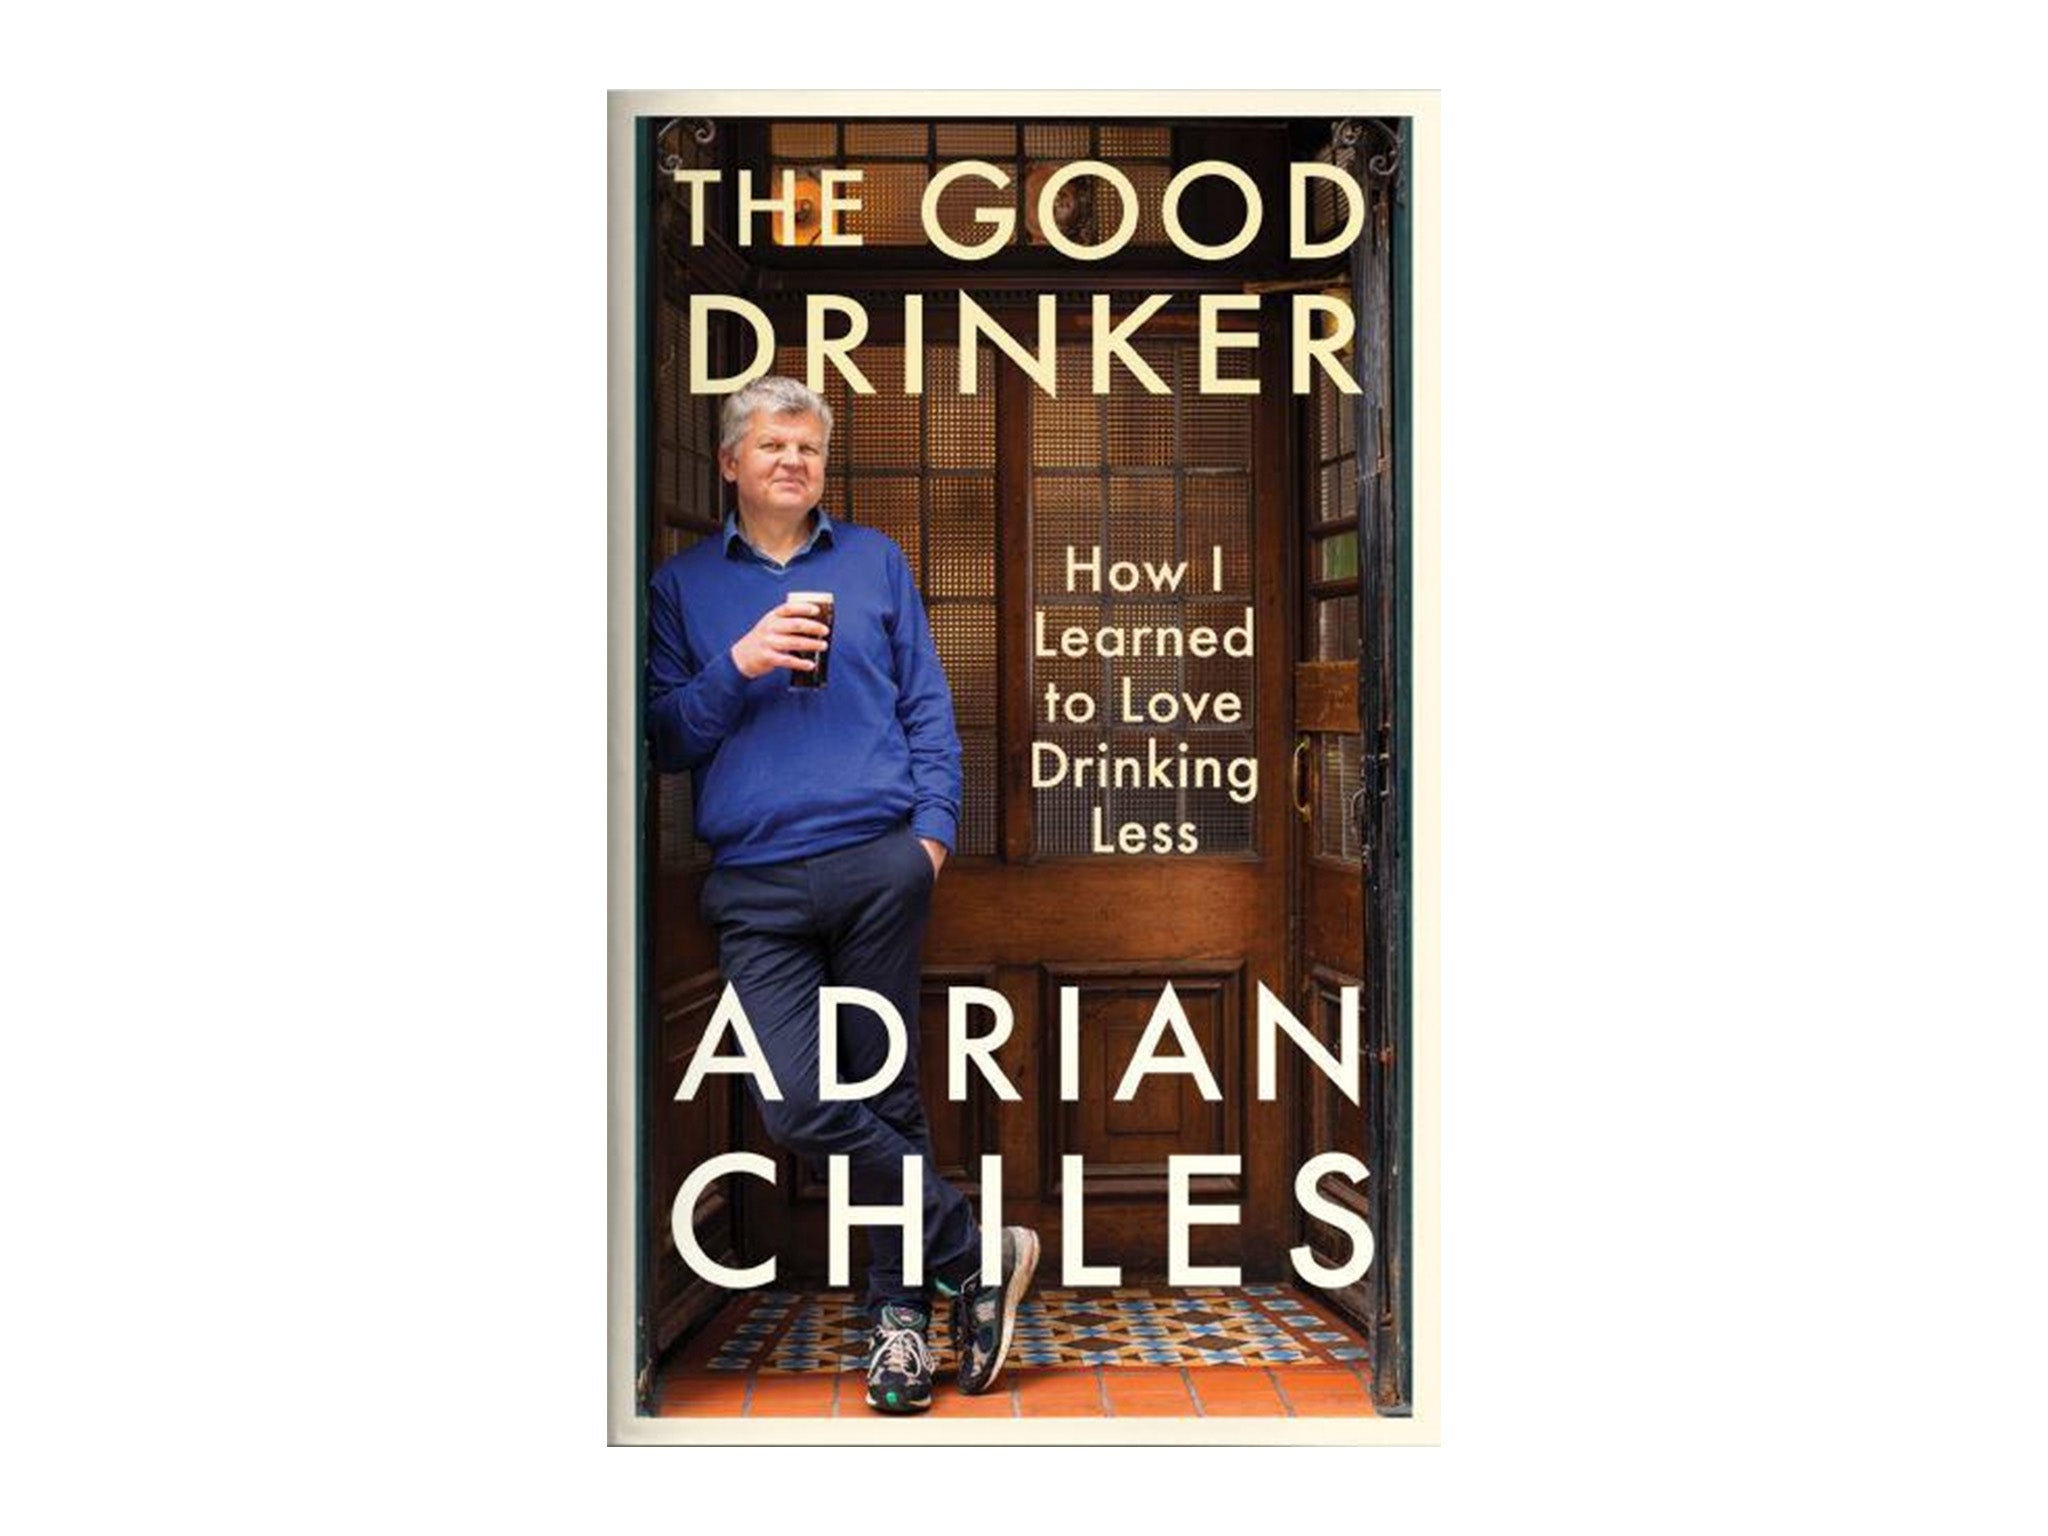 The Good Drinker by Adrian Chiles, published by Profile Books 